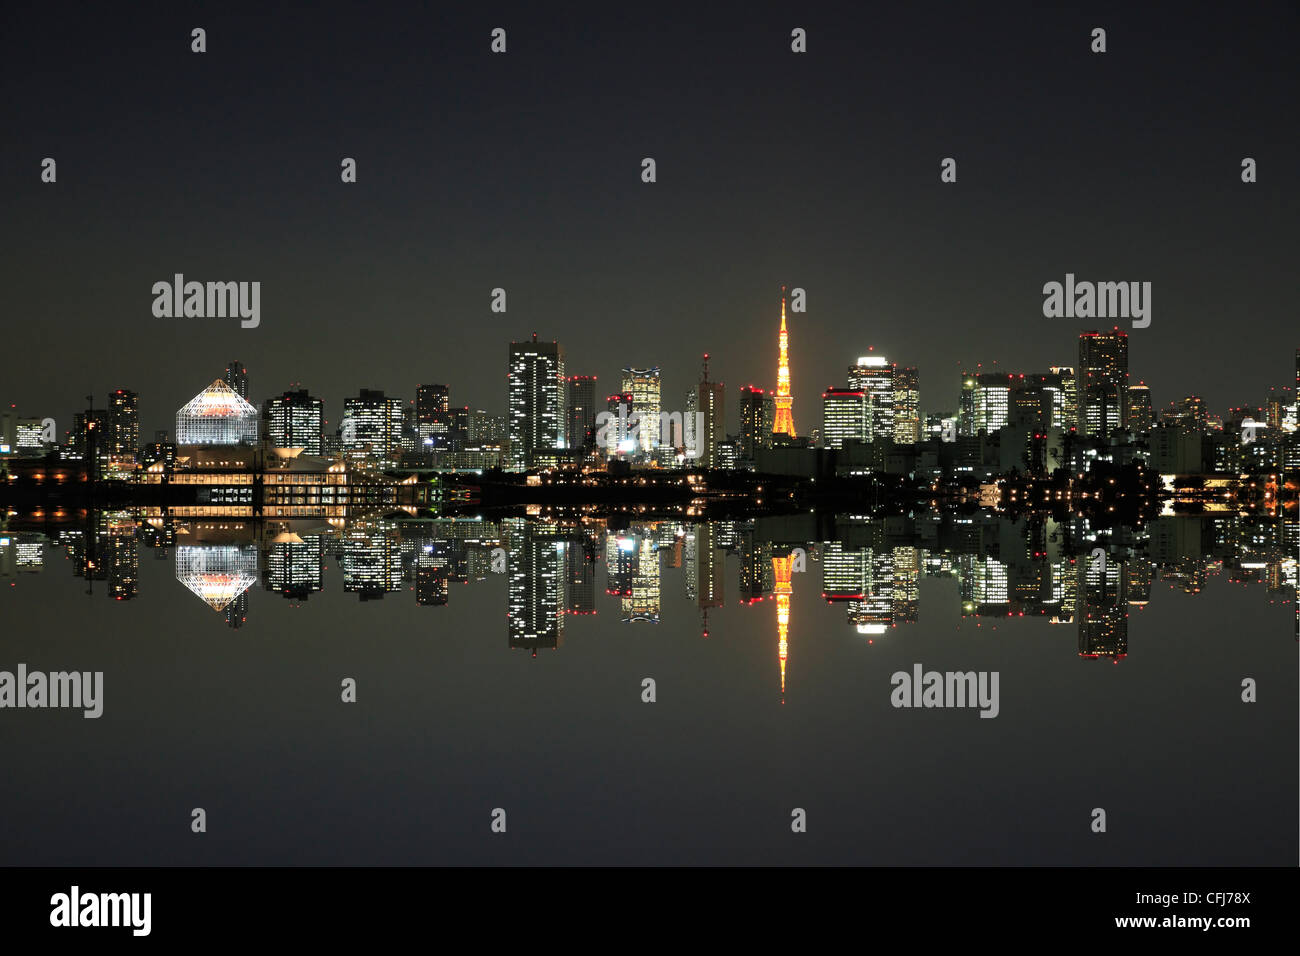 View of Tokyo downtown at night Stock Photo